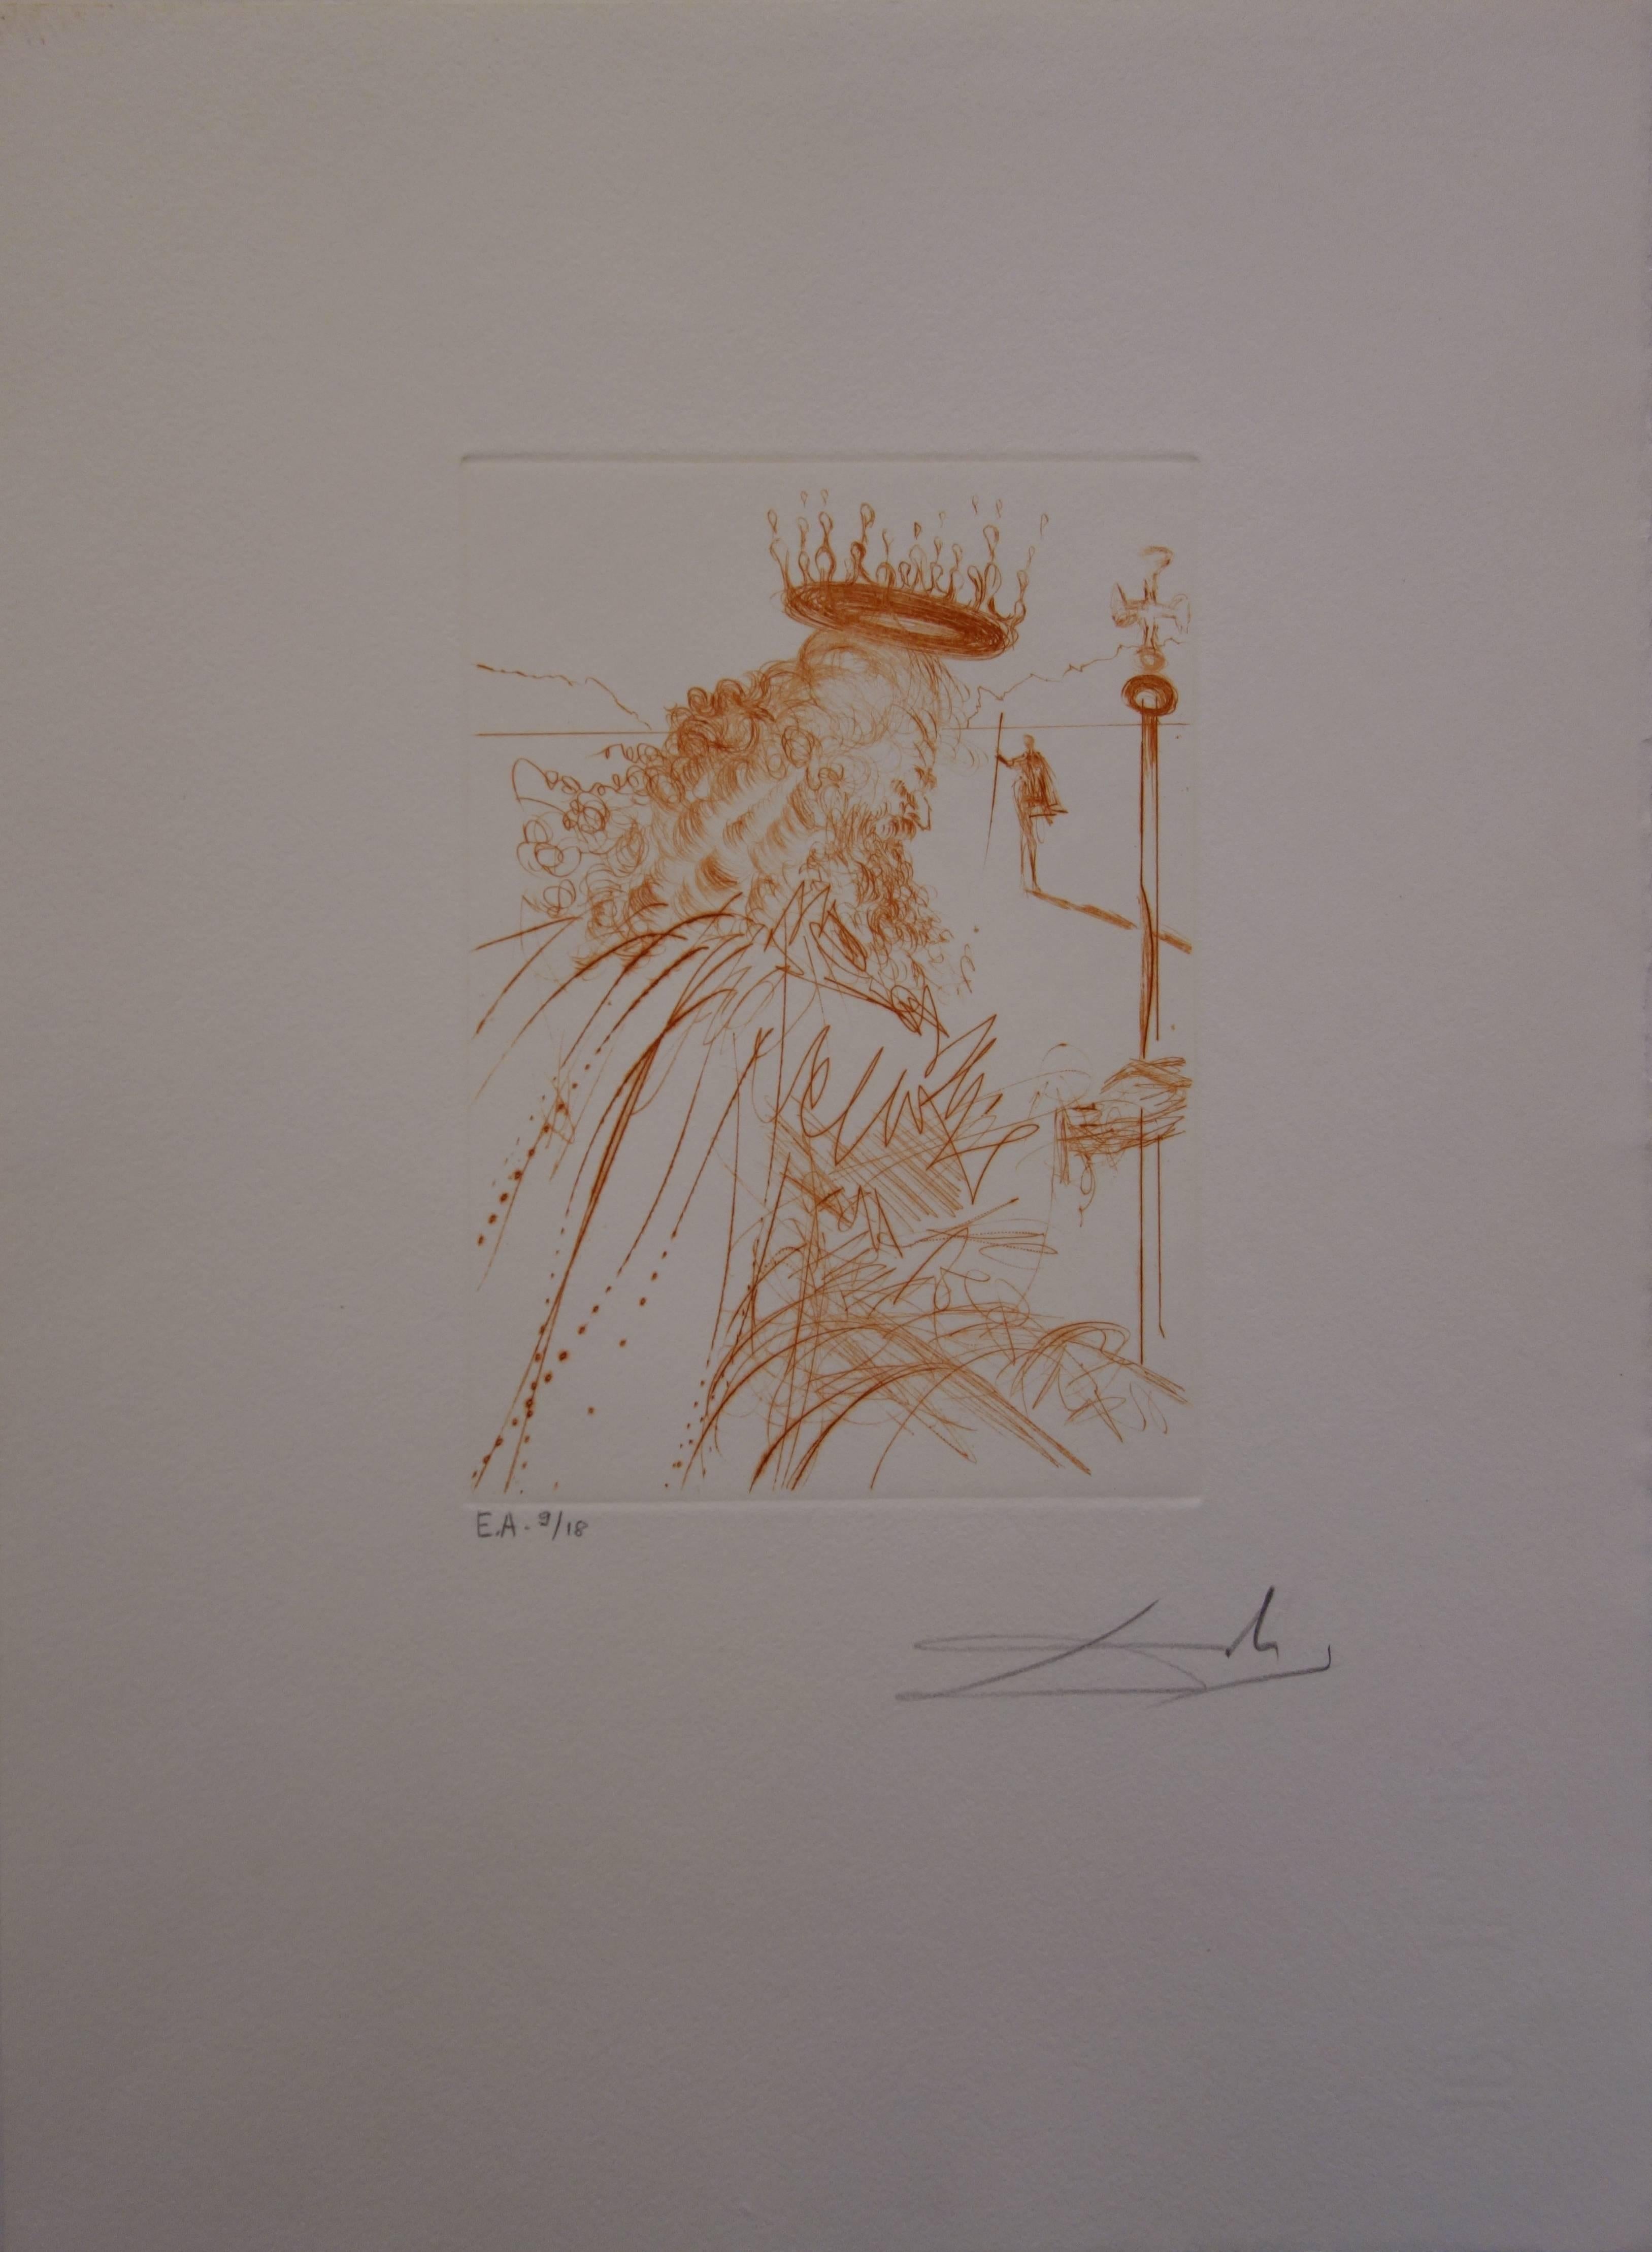 Much Ado About Shakespeare : King Lear - Original  Signed Etching - Surrealist Print by Salvador Dalí